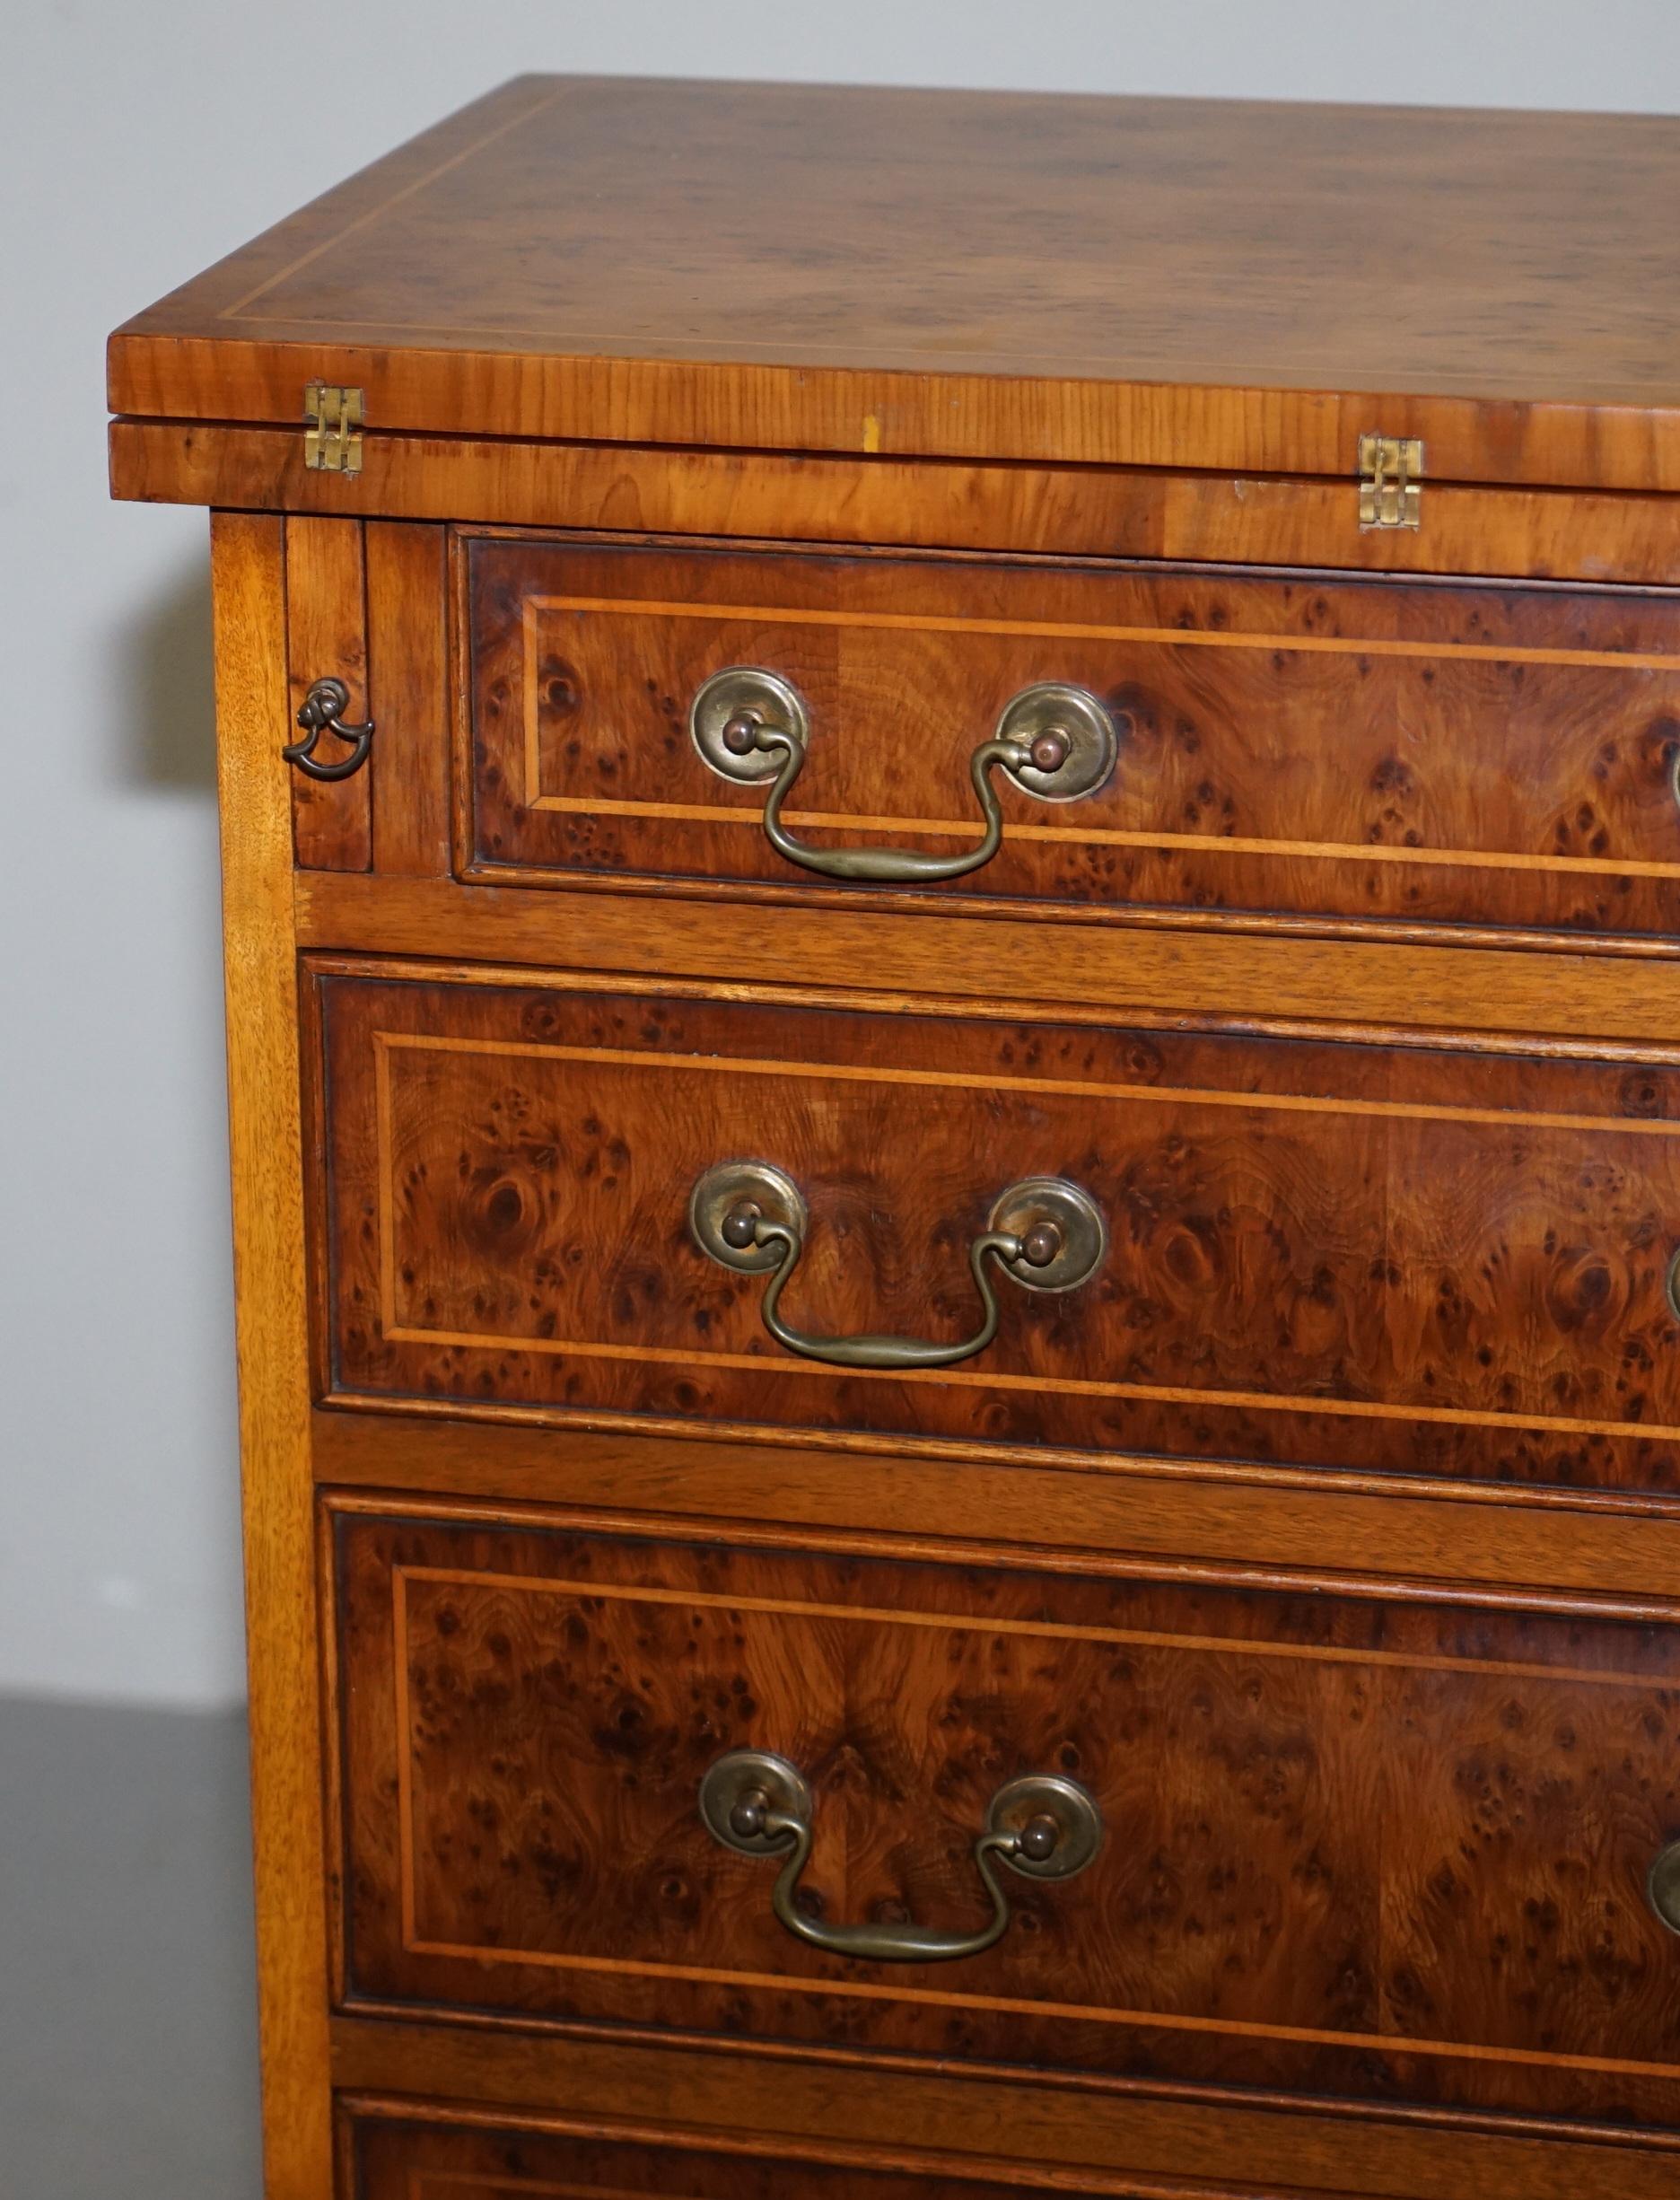 Sublime Burr Walnut Side Table Sized Chest of Drawers with Butlers Serving Tray 1